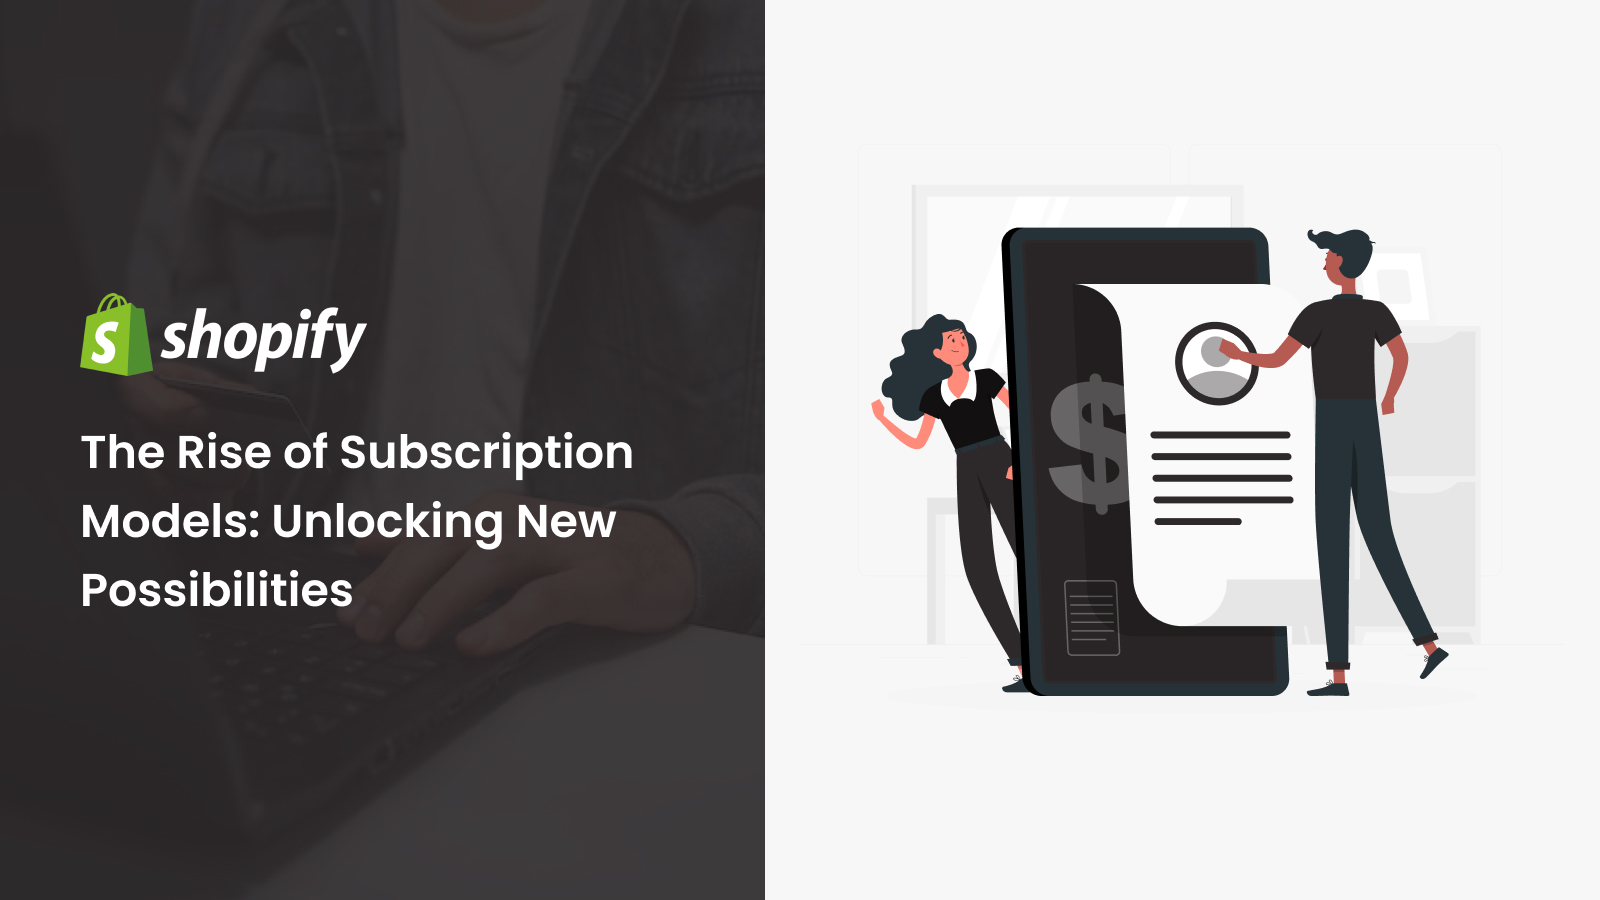 The Rise of Subscription Models: Unlocking New Possibilities